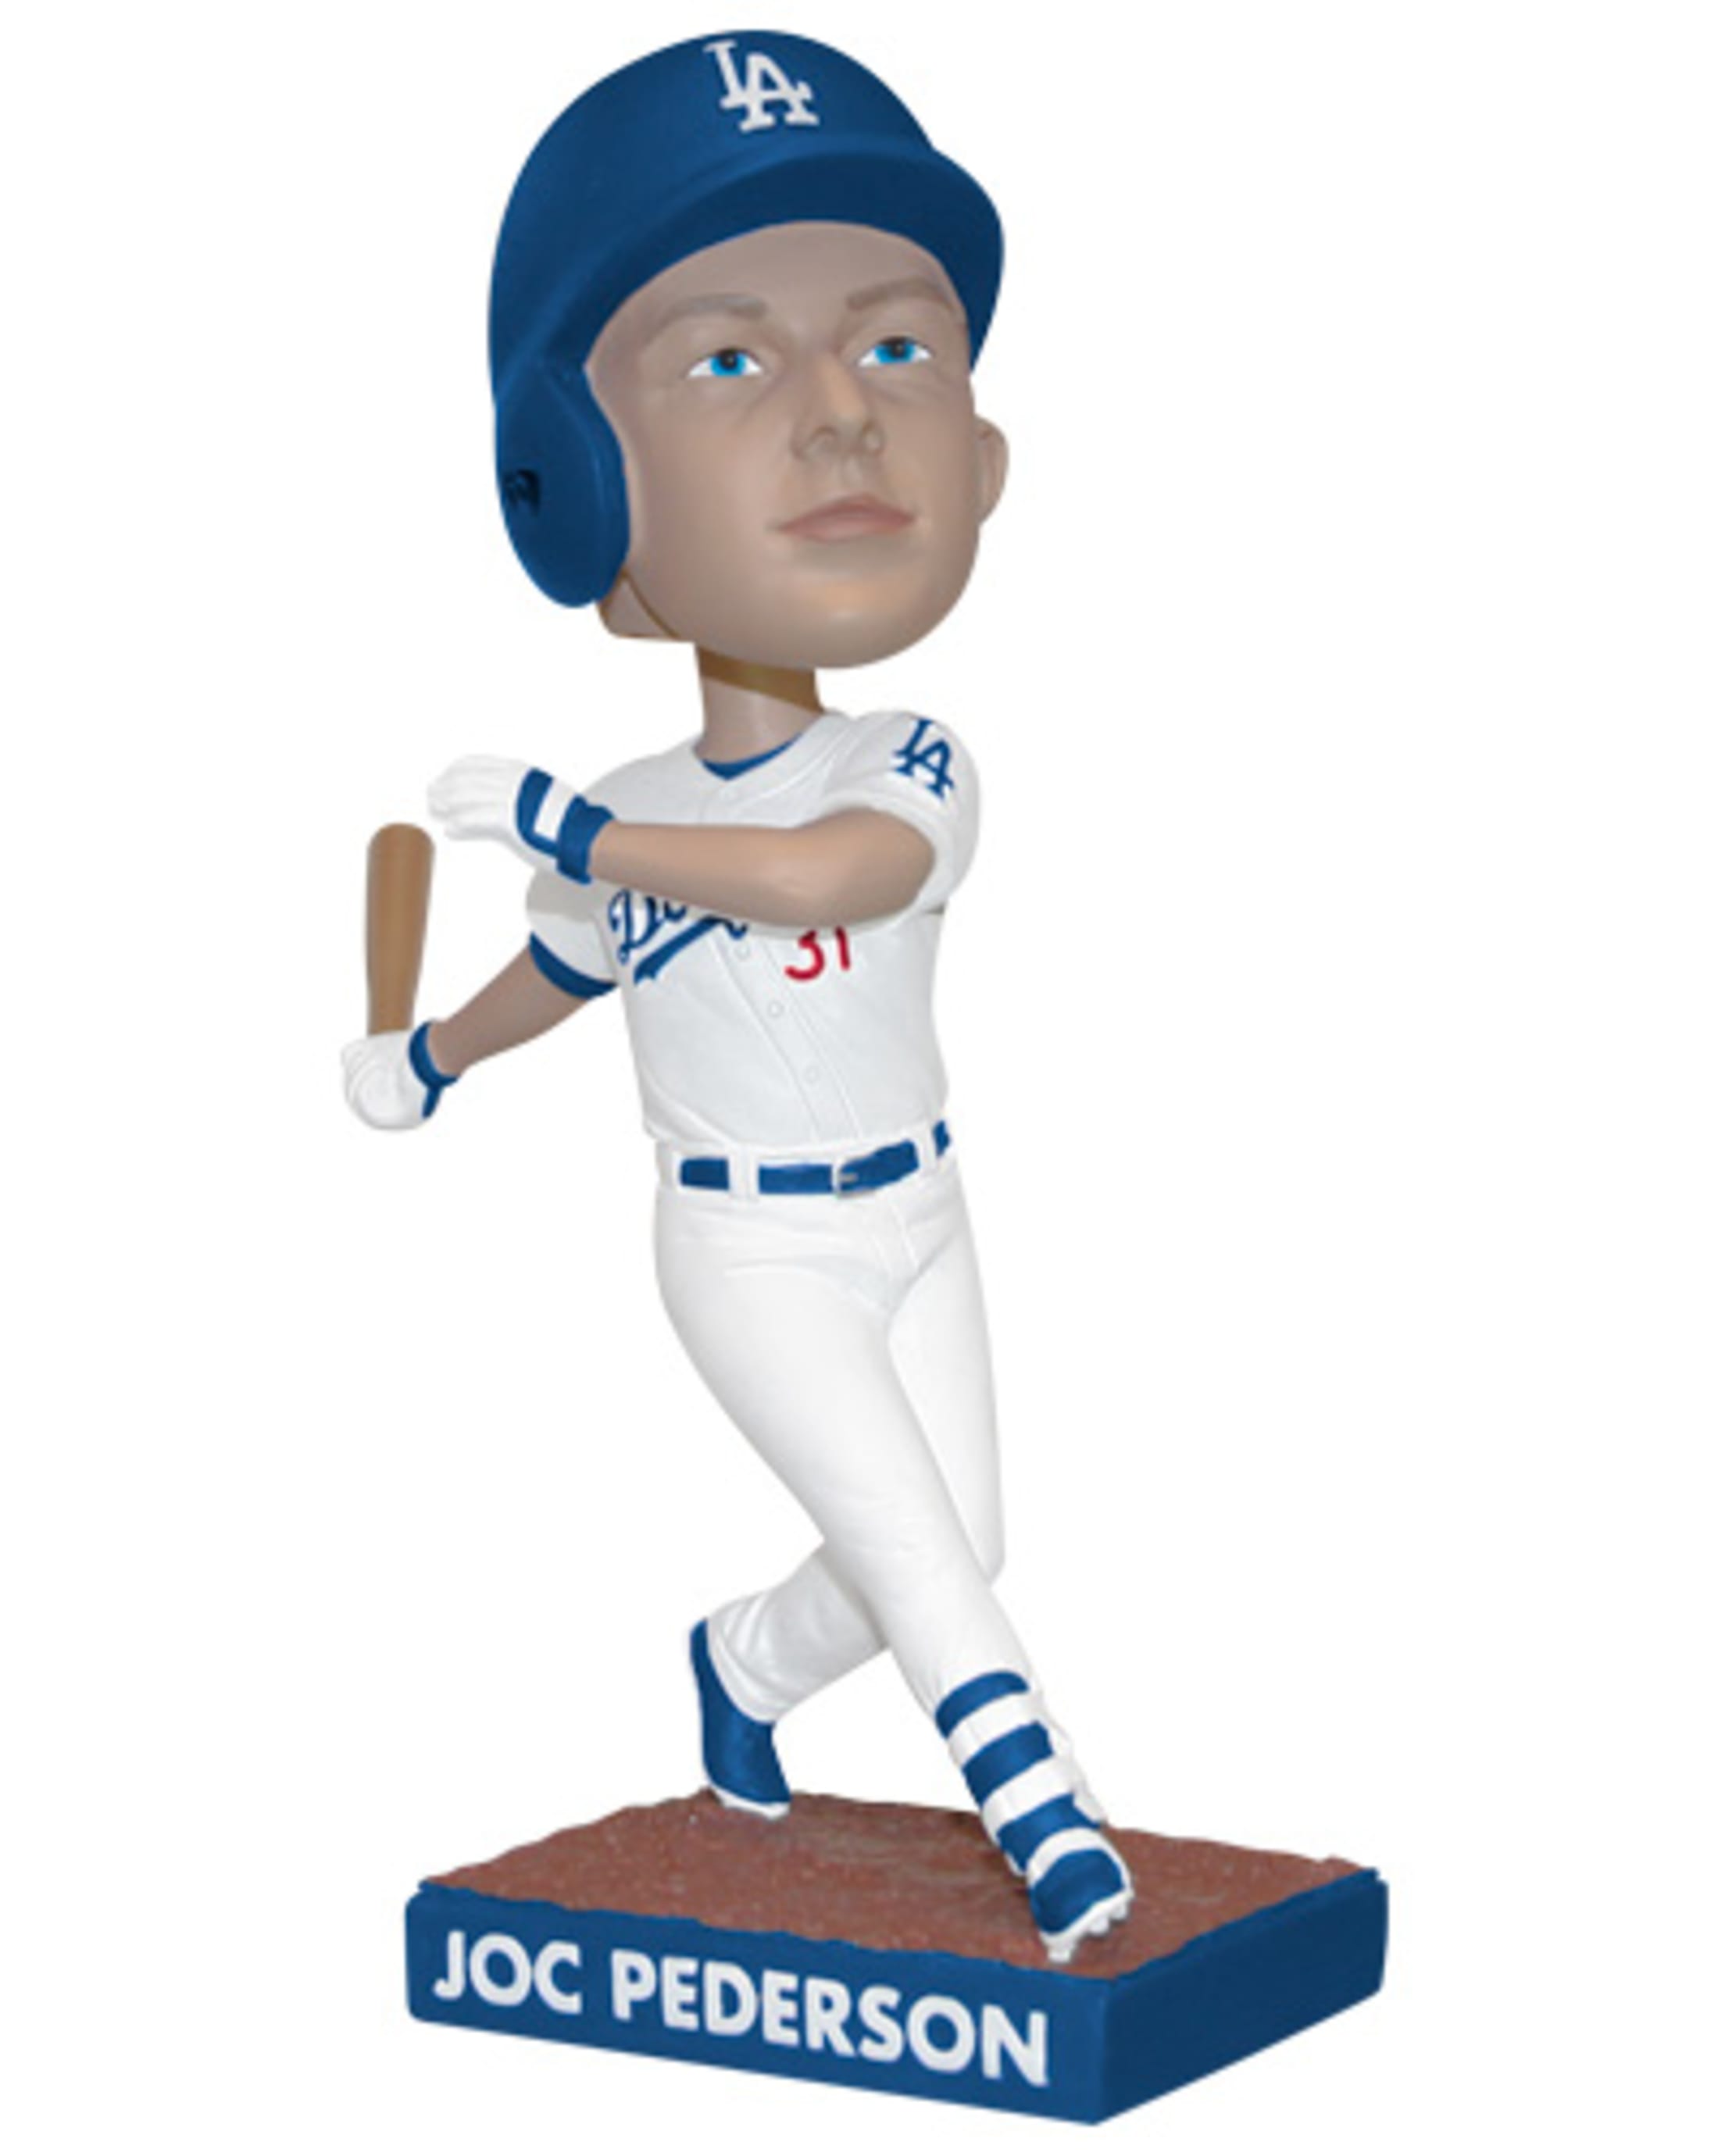 Dodgers 2017 Bobbleheads (11 Great Bobblehead Giveaways)